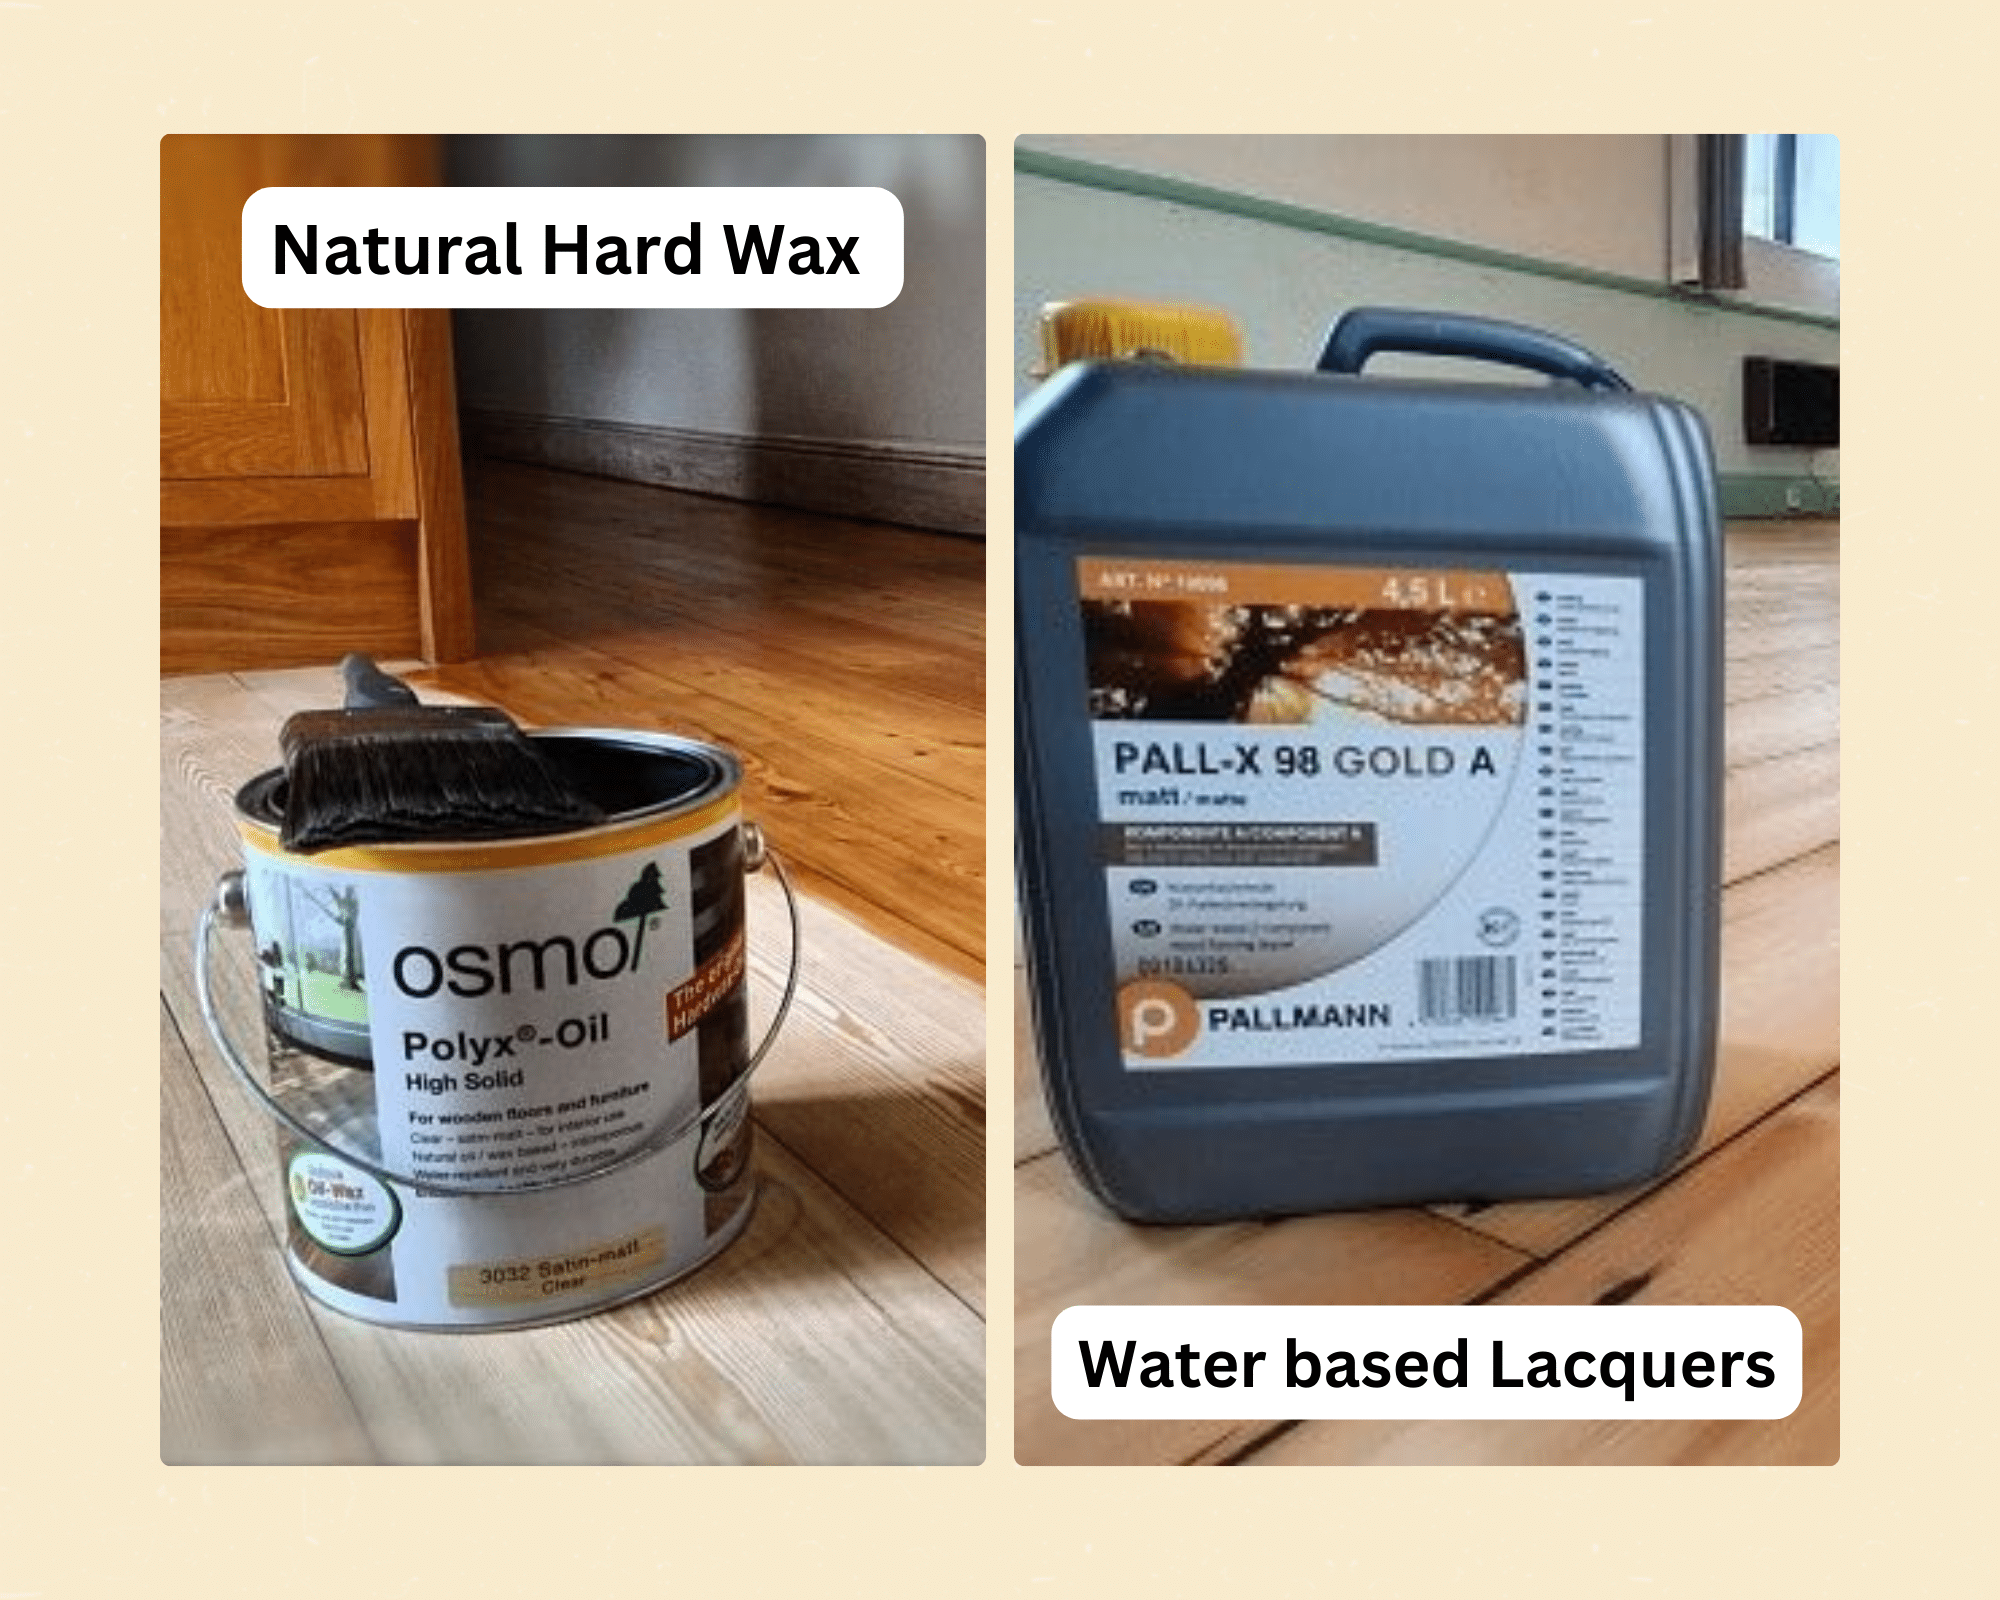 The difference between Natural Hardwax and Water-based Lacquers?